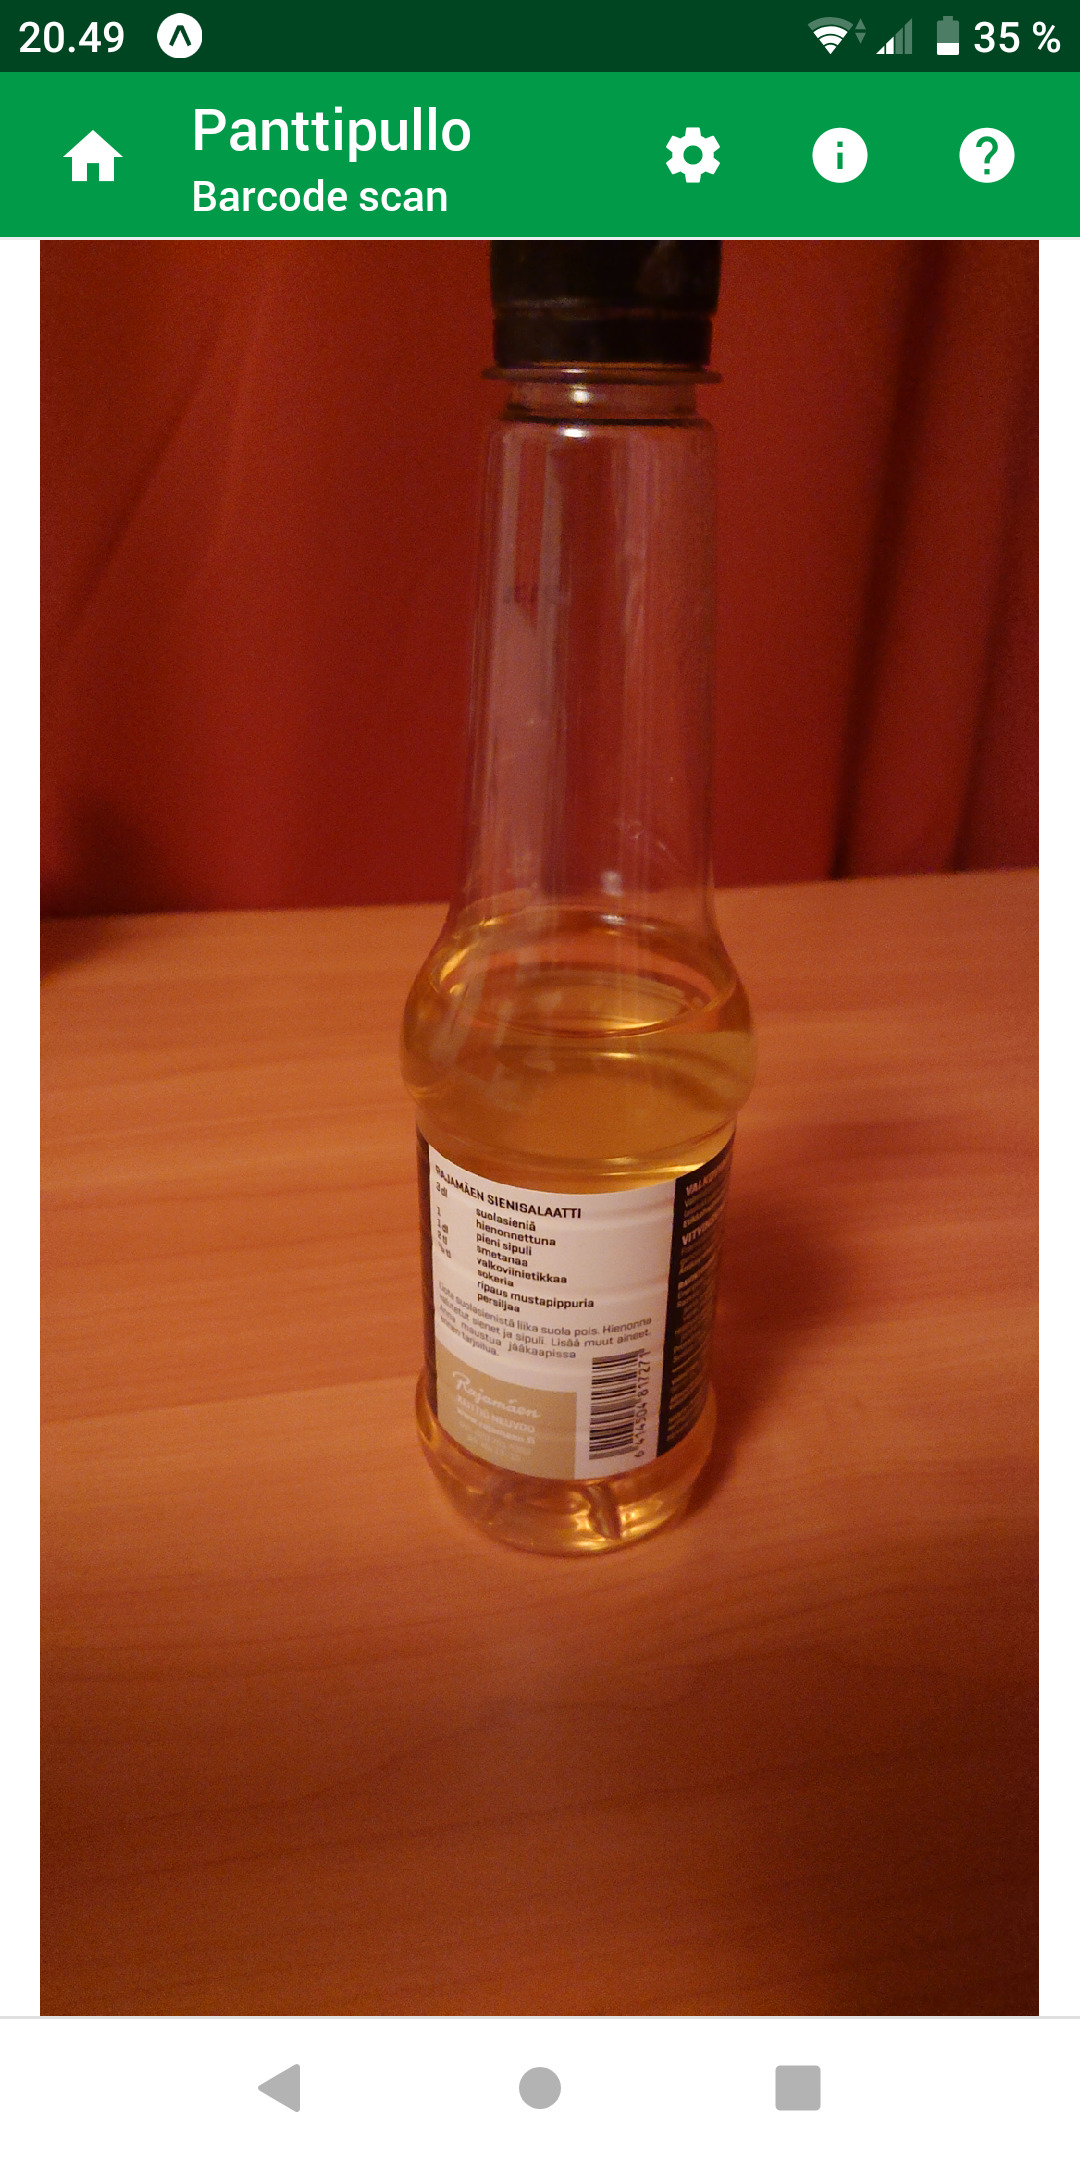 Scanning barcode from a plastic bottle